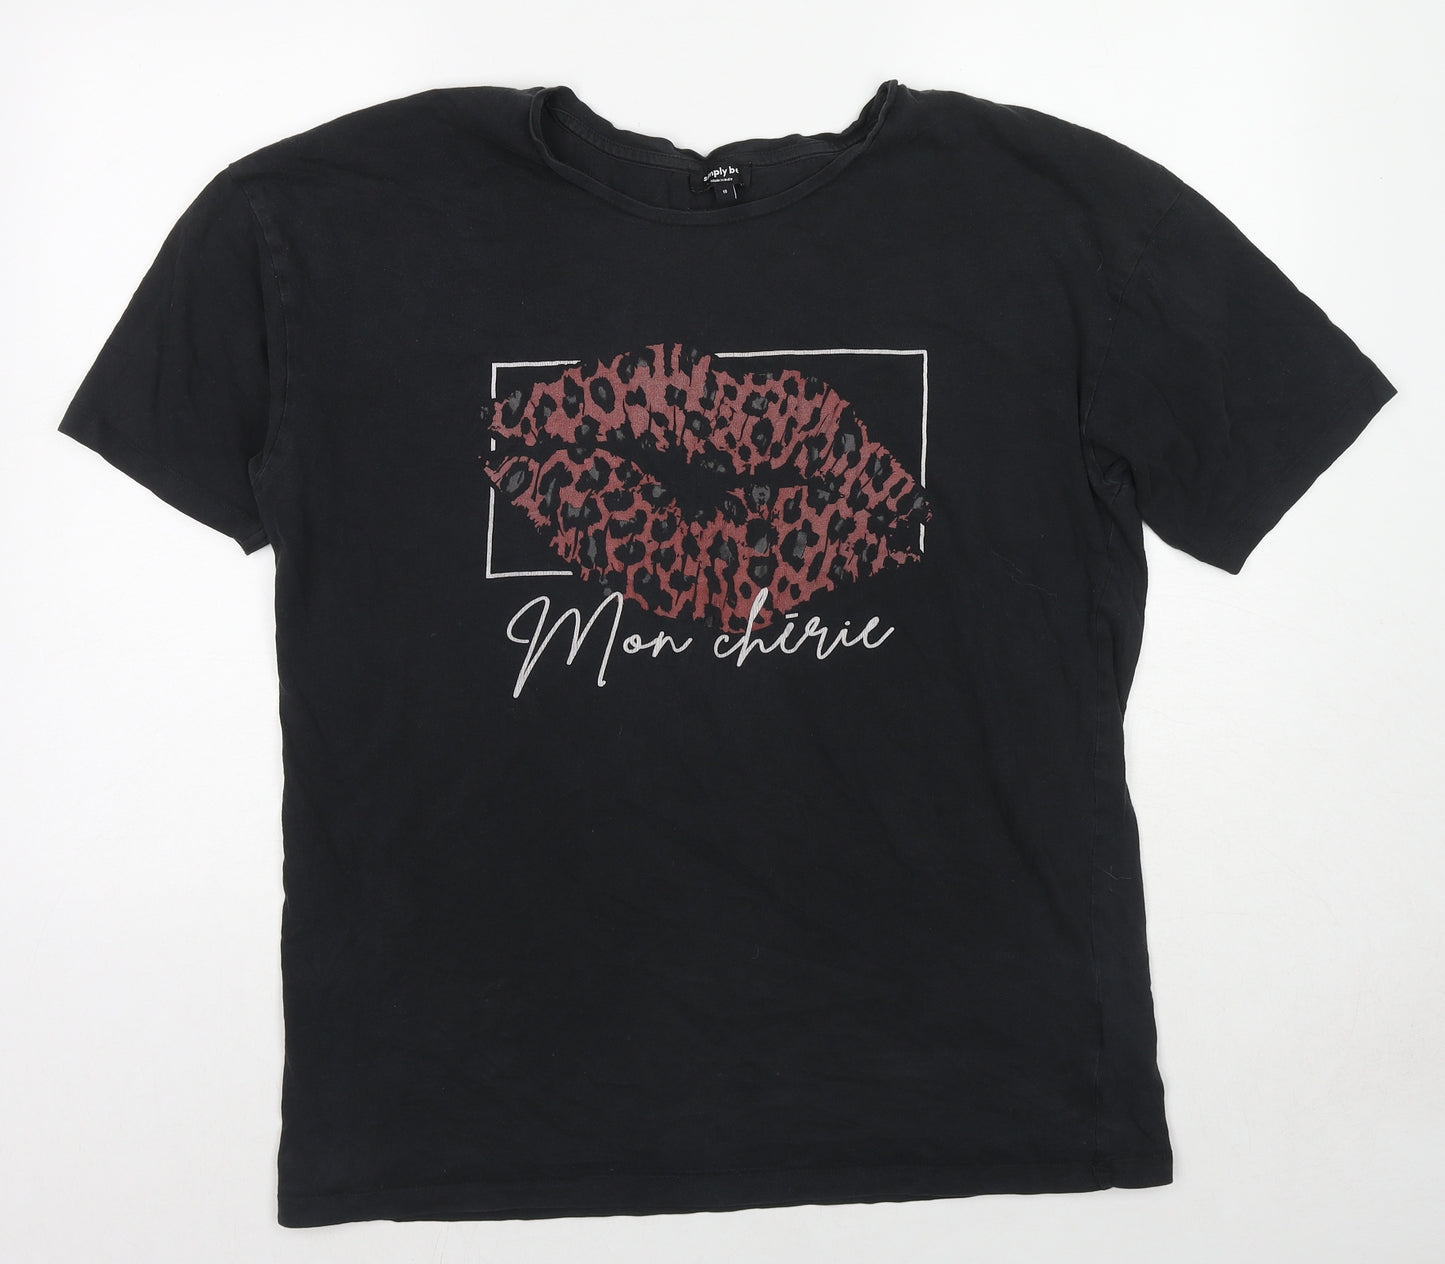 Simply Be Womens Black Cotton Basic T-Shirt Size 16 Round Neck - Leopard Print, French Writing